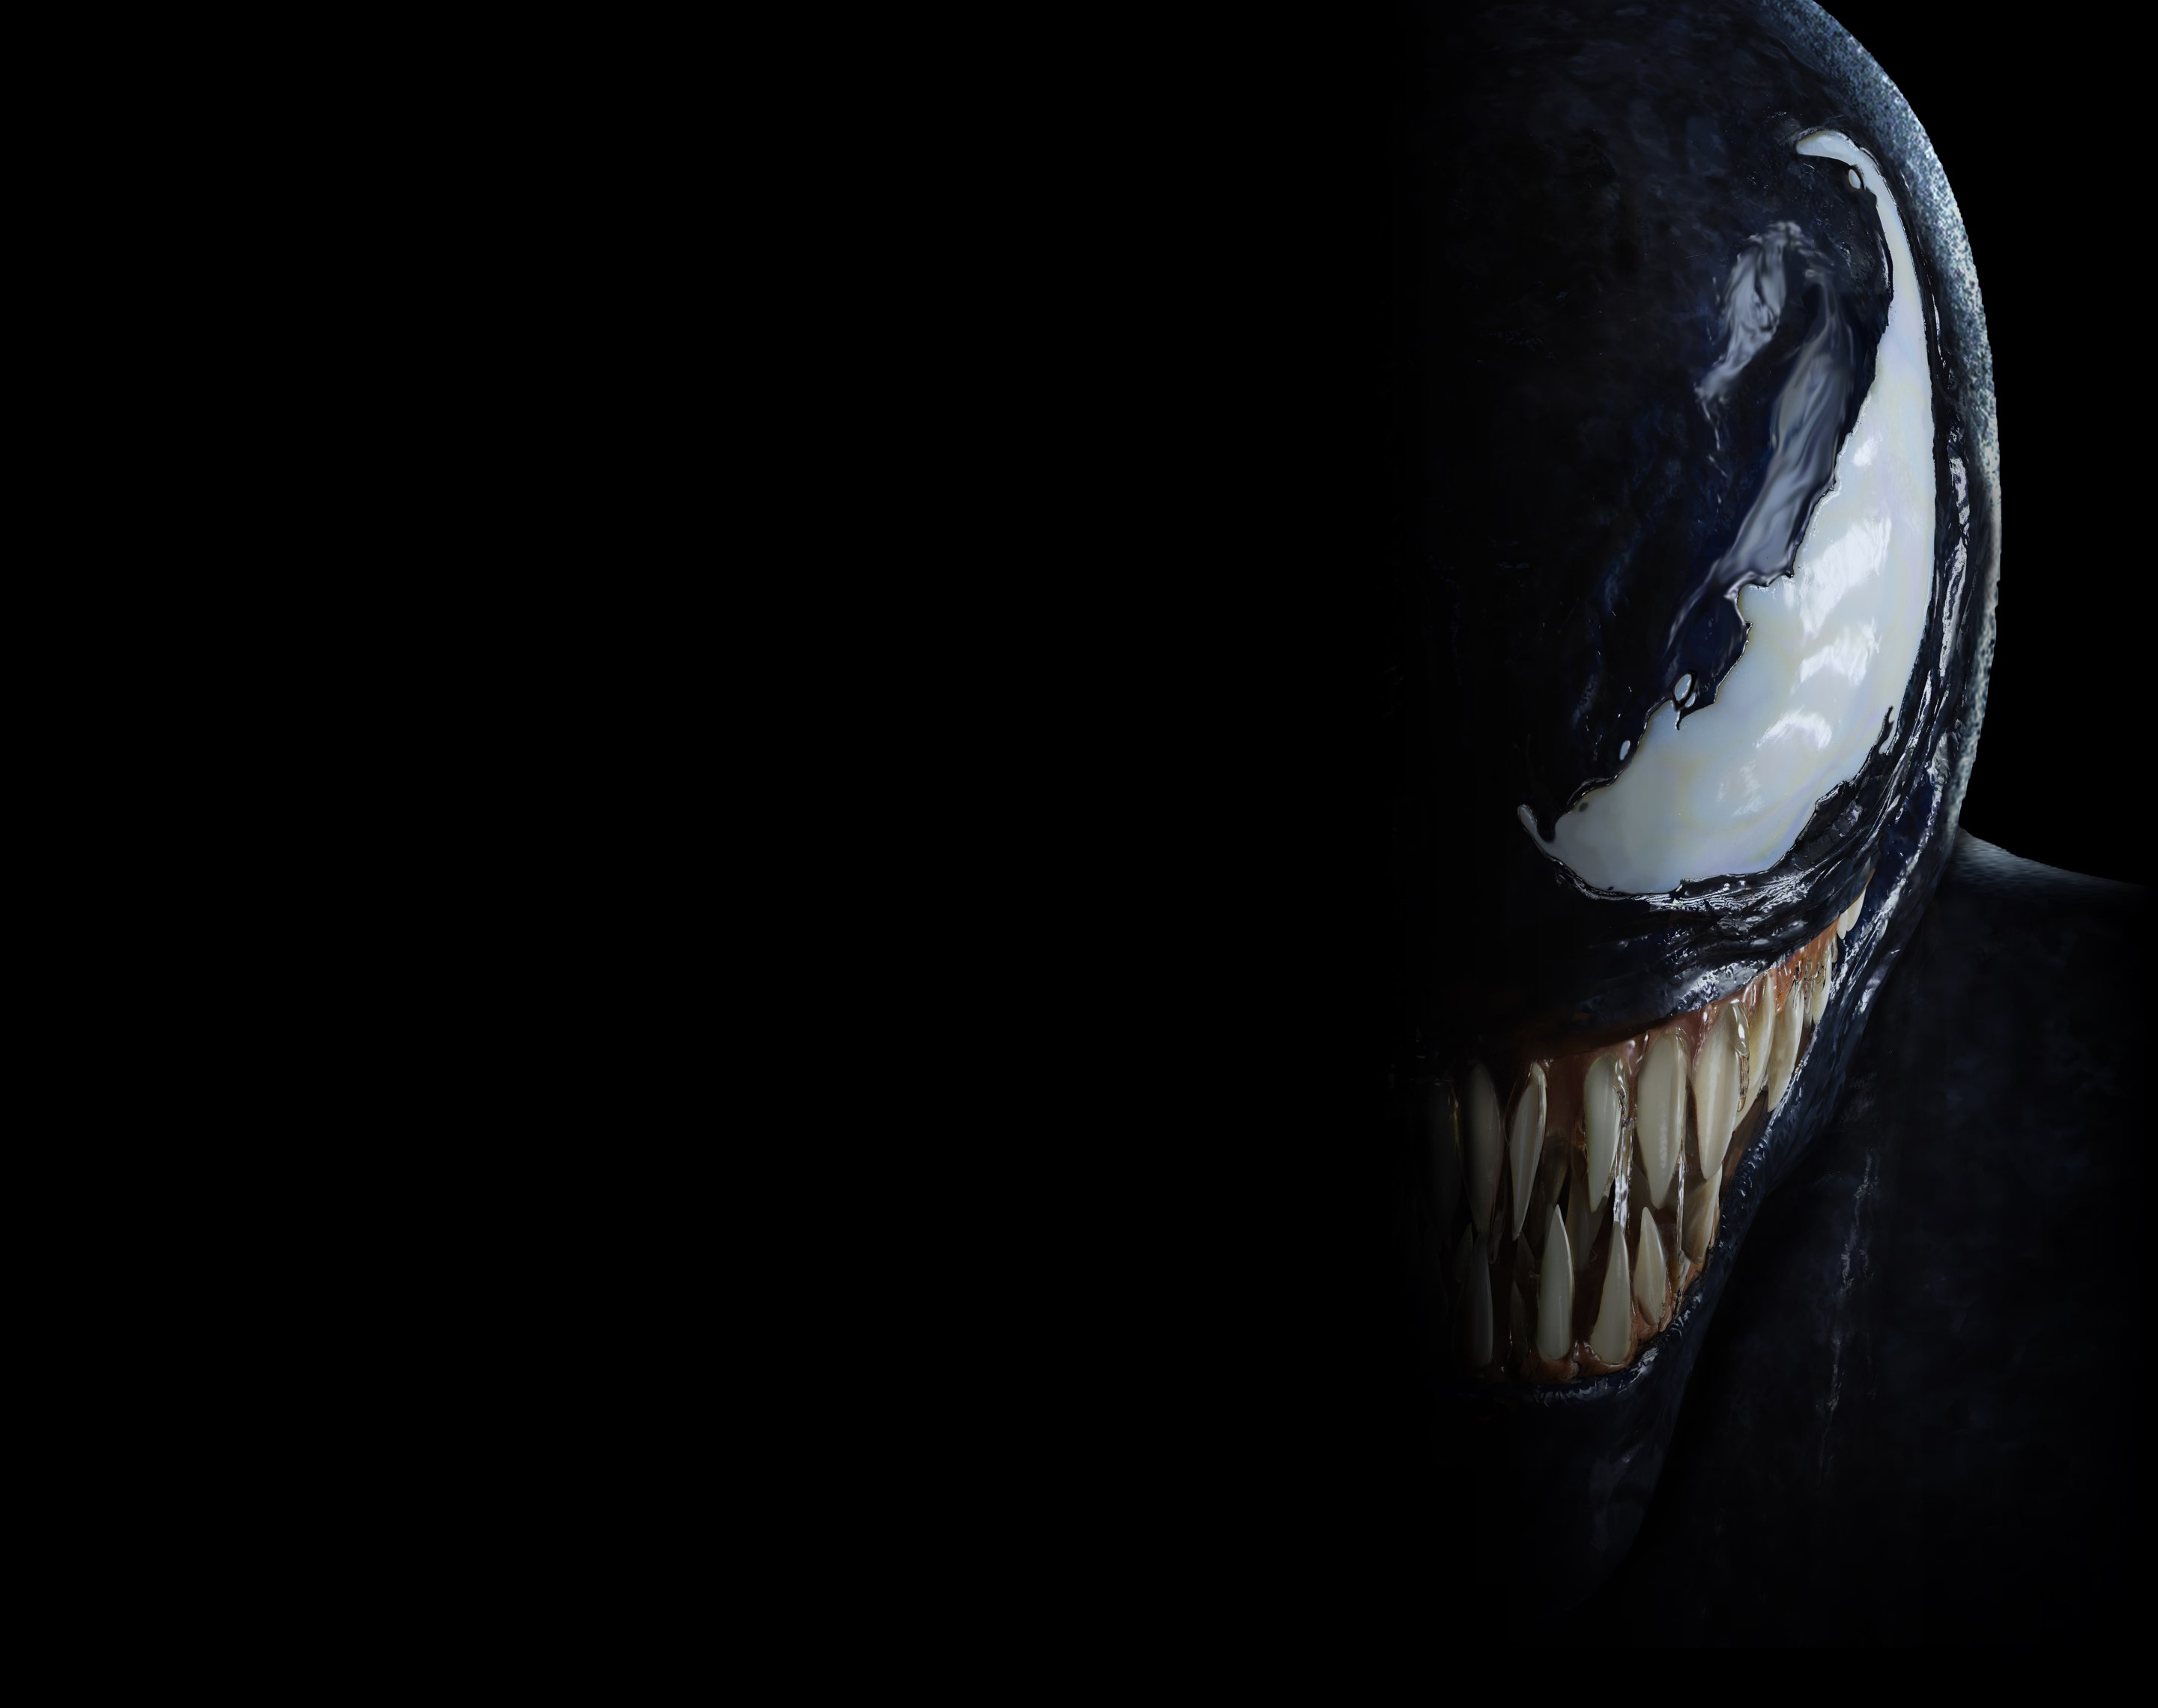 2018 Venom Movie Poster, HD Movies, 4k Wallpapers, Images, Backgrounds,  Photos and Pictures